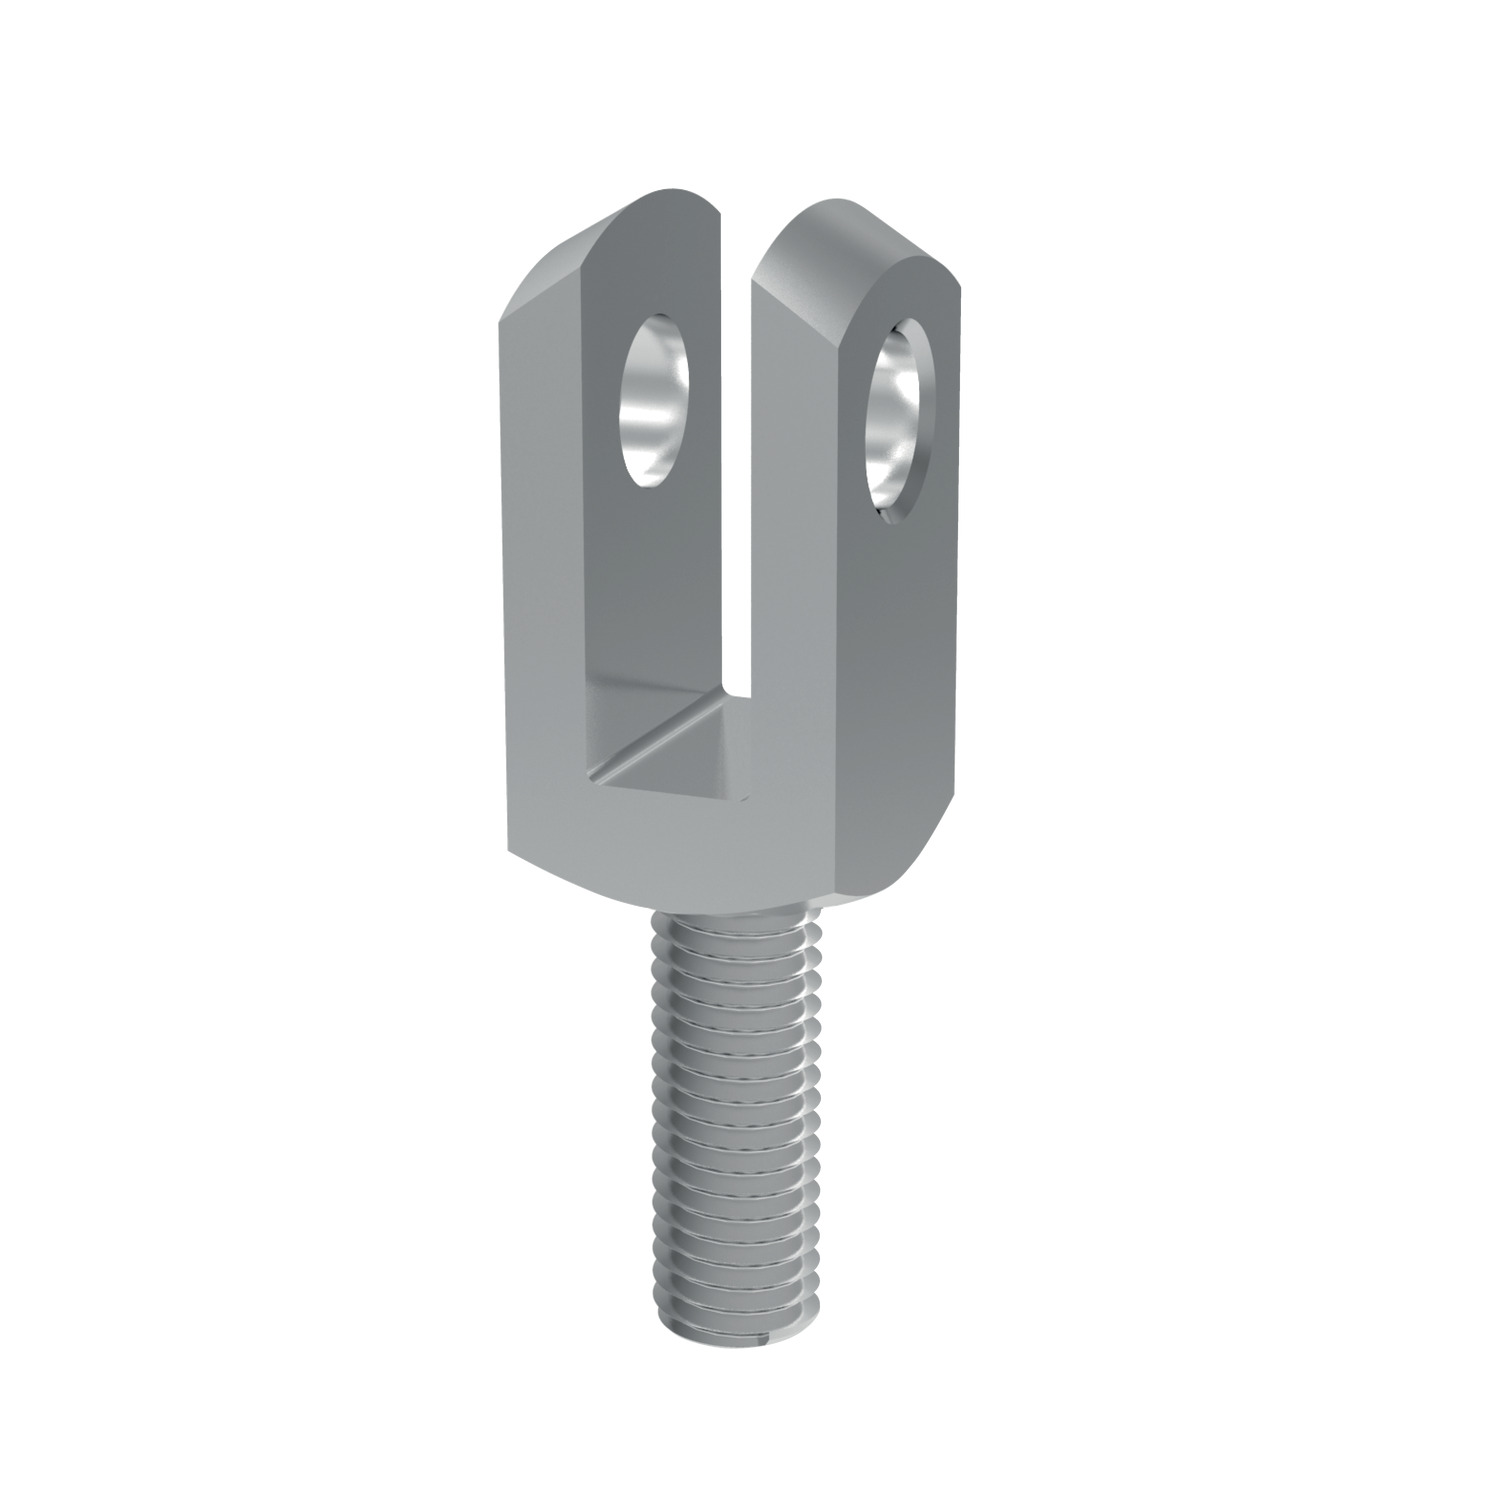 Product R3417, Stainless Male Clevis Joints left hand thread / 